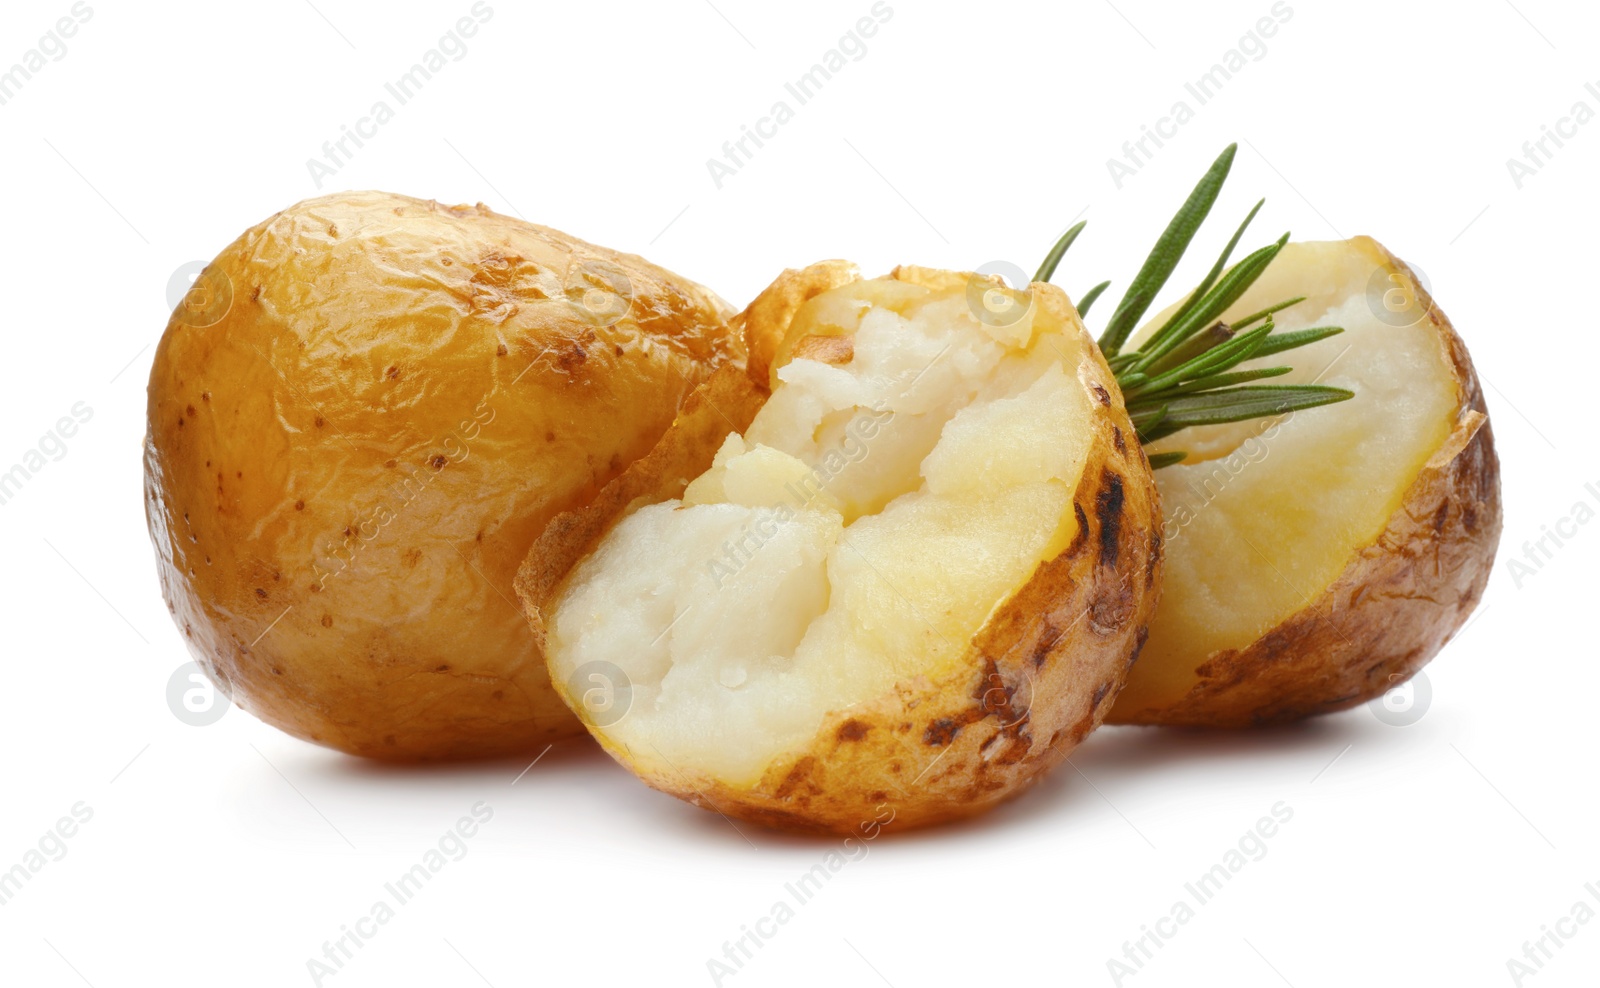 Photo of Tasty pieces of baked potatoes and rosemary on white background